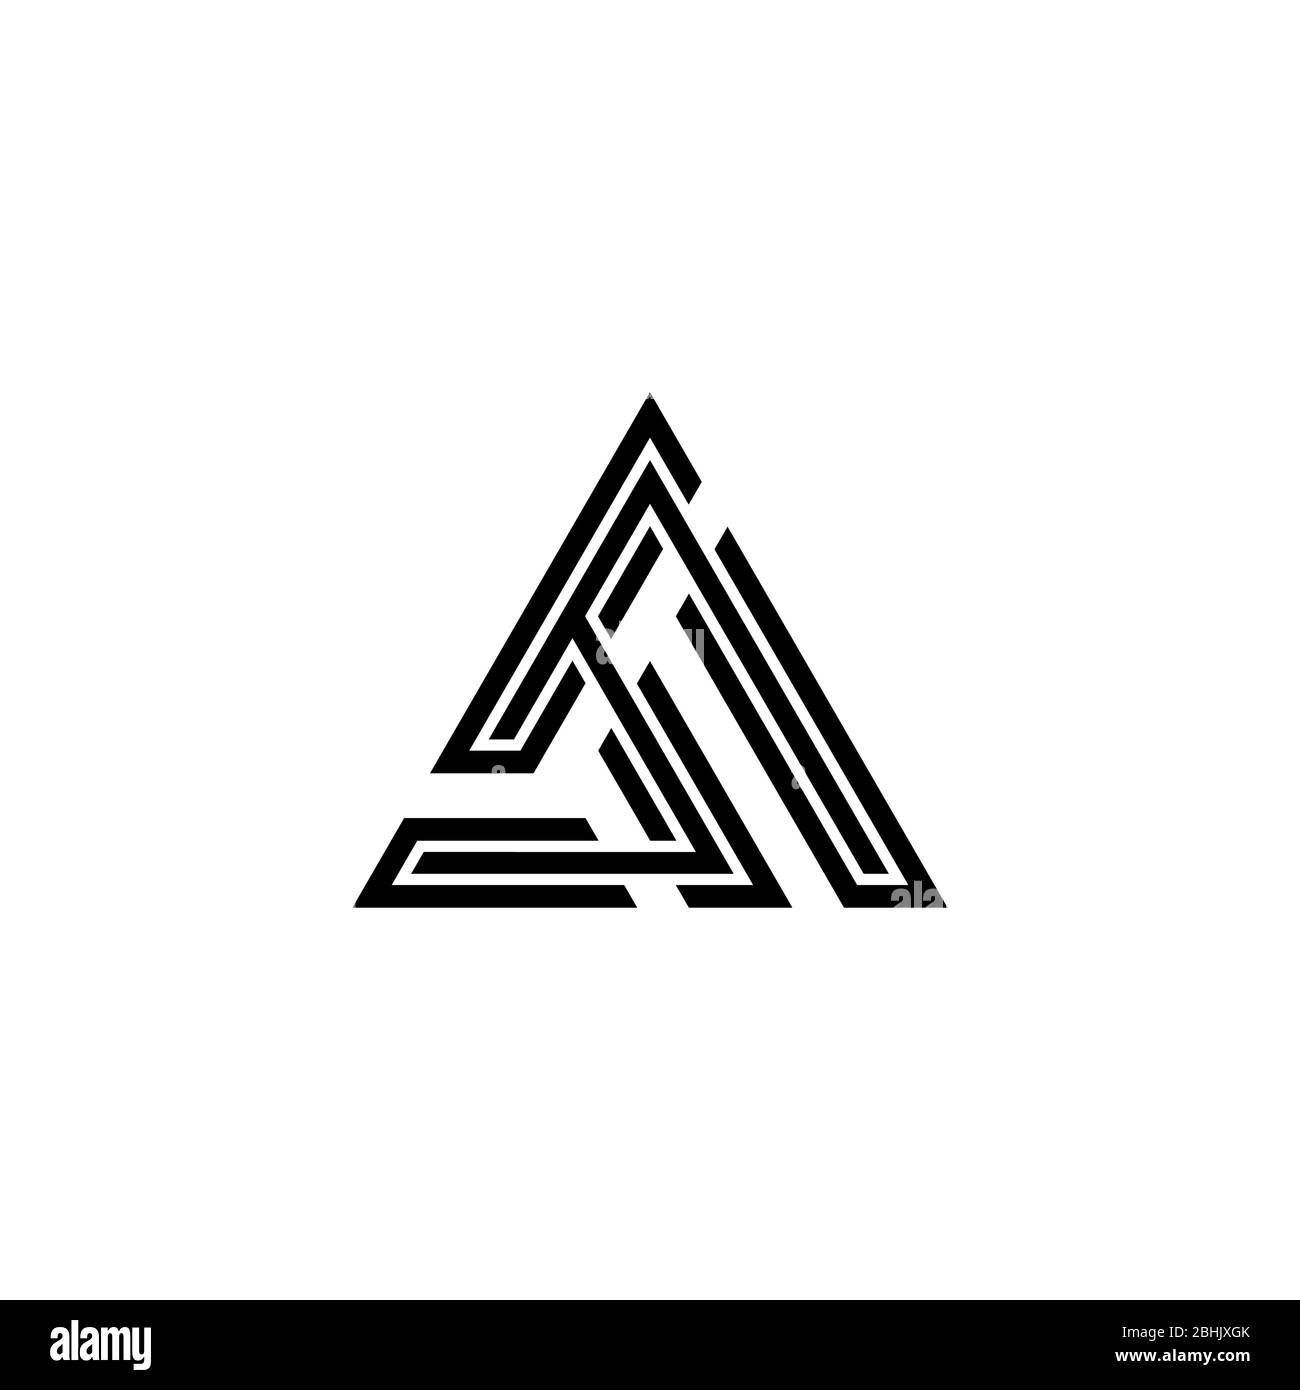 Creative triangle graphic logo template, initial letter A logo concept ...